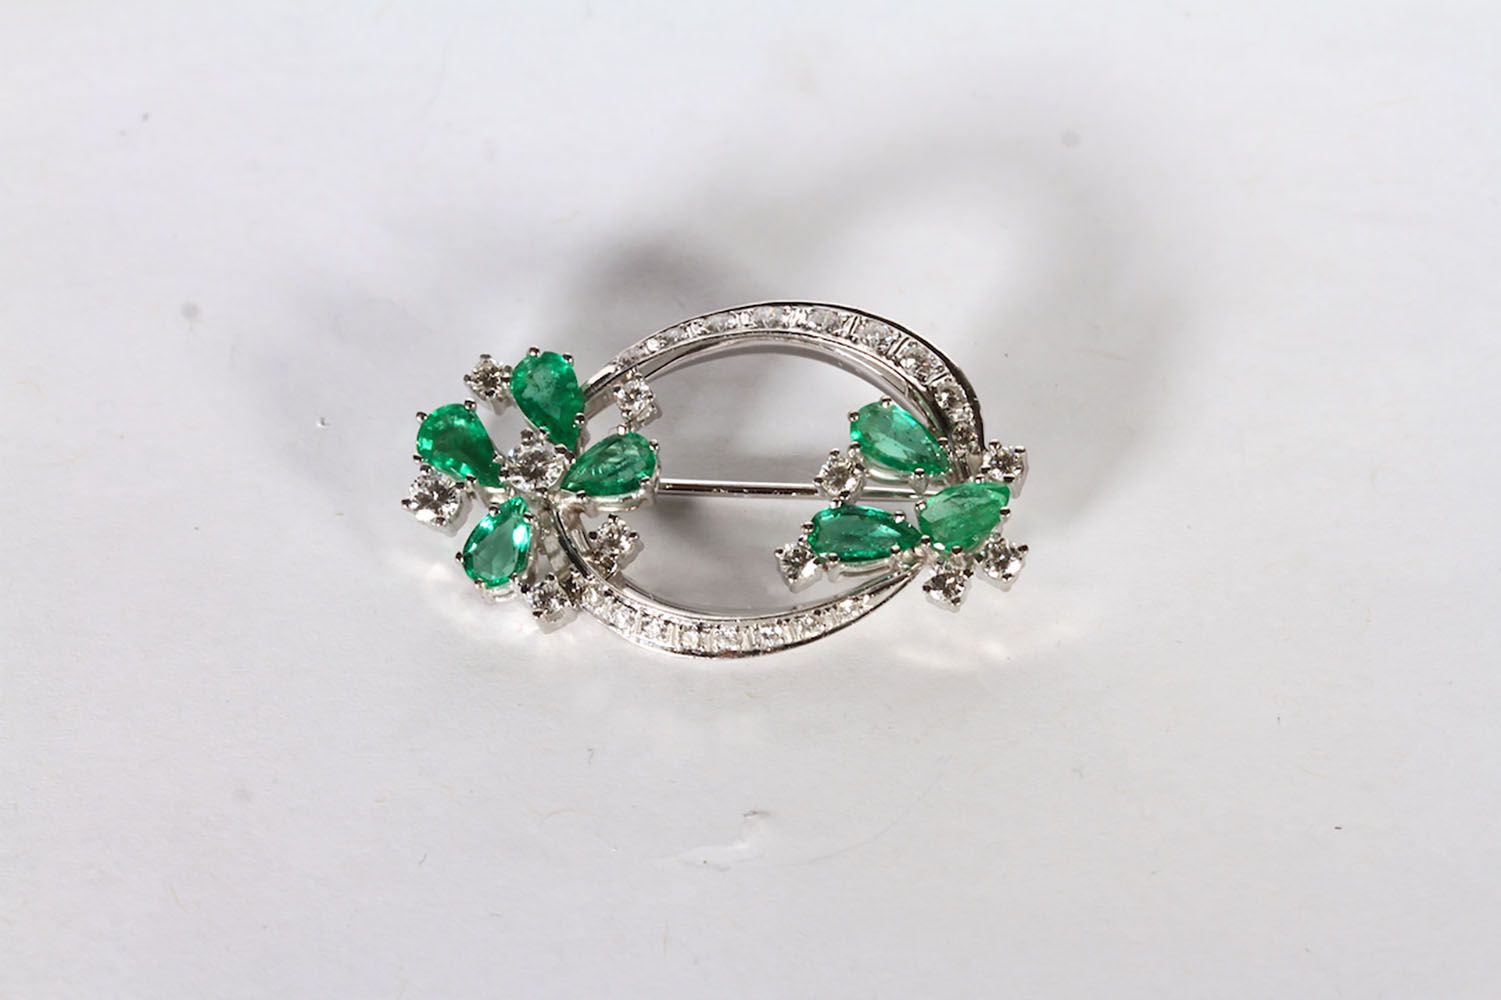 14CT WHITE GOLD EMERALD AND DIAMOND BROOCH ,PRONG SET AND STYLED AS TWO FLOWERS WITH EMERALD